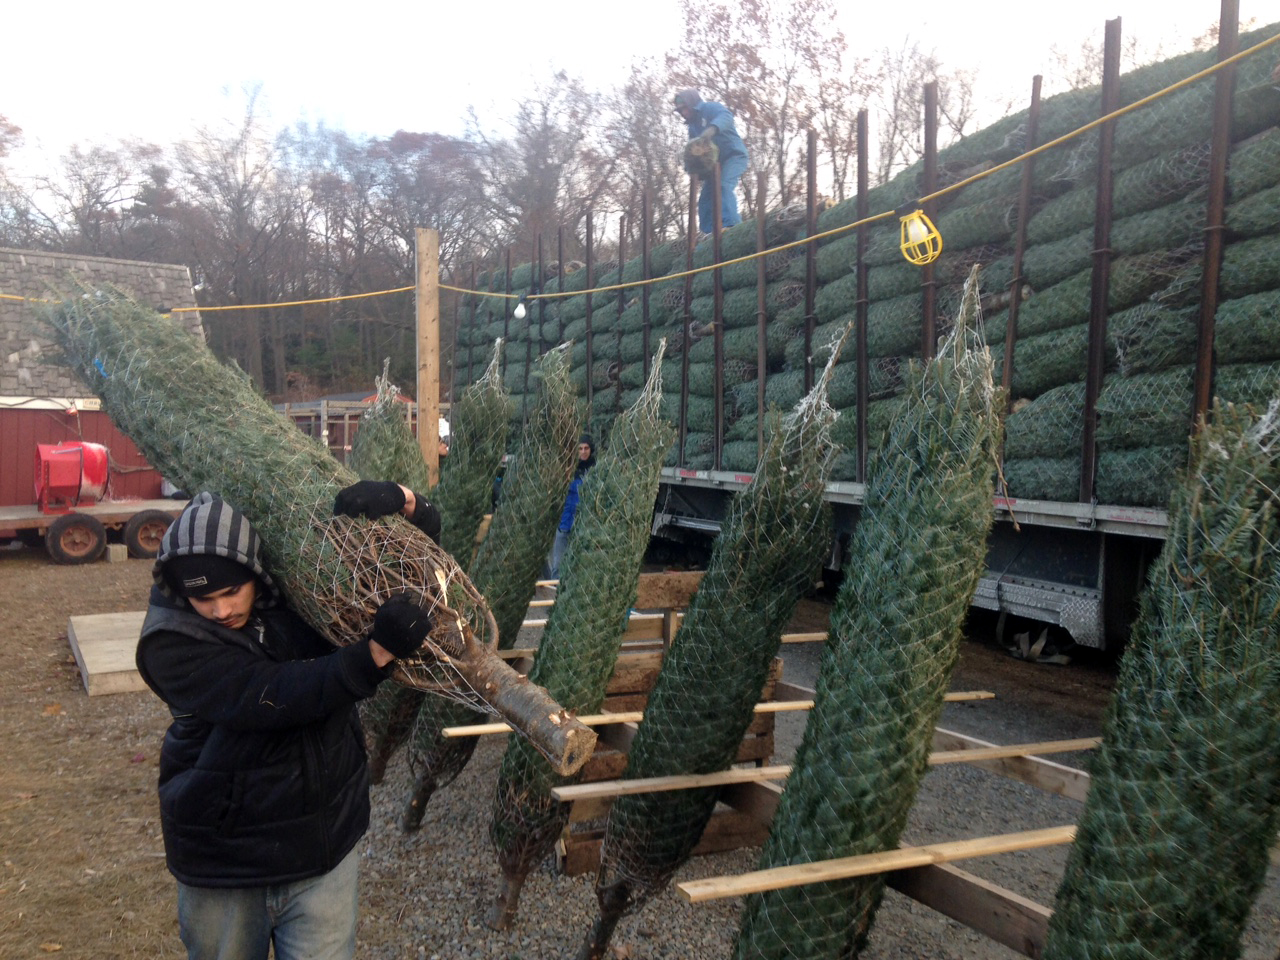 A crew unloads a truckload of 800 fir trees at Smolack Farms in North Andover, Mass. The farm can't grow its own trees fast enough, so the rest are shipped in from Quebec. (Peter O'Dowd/Here &amp; Now)